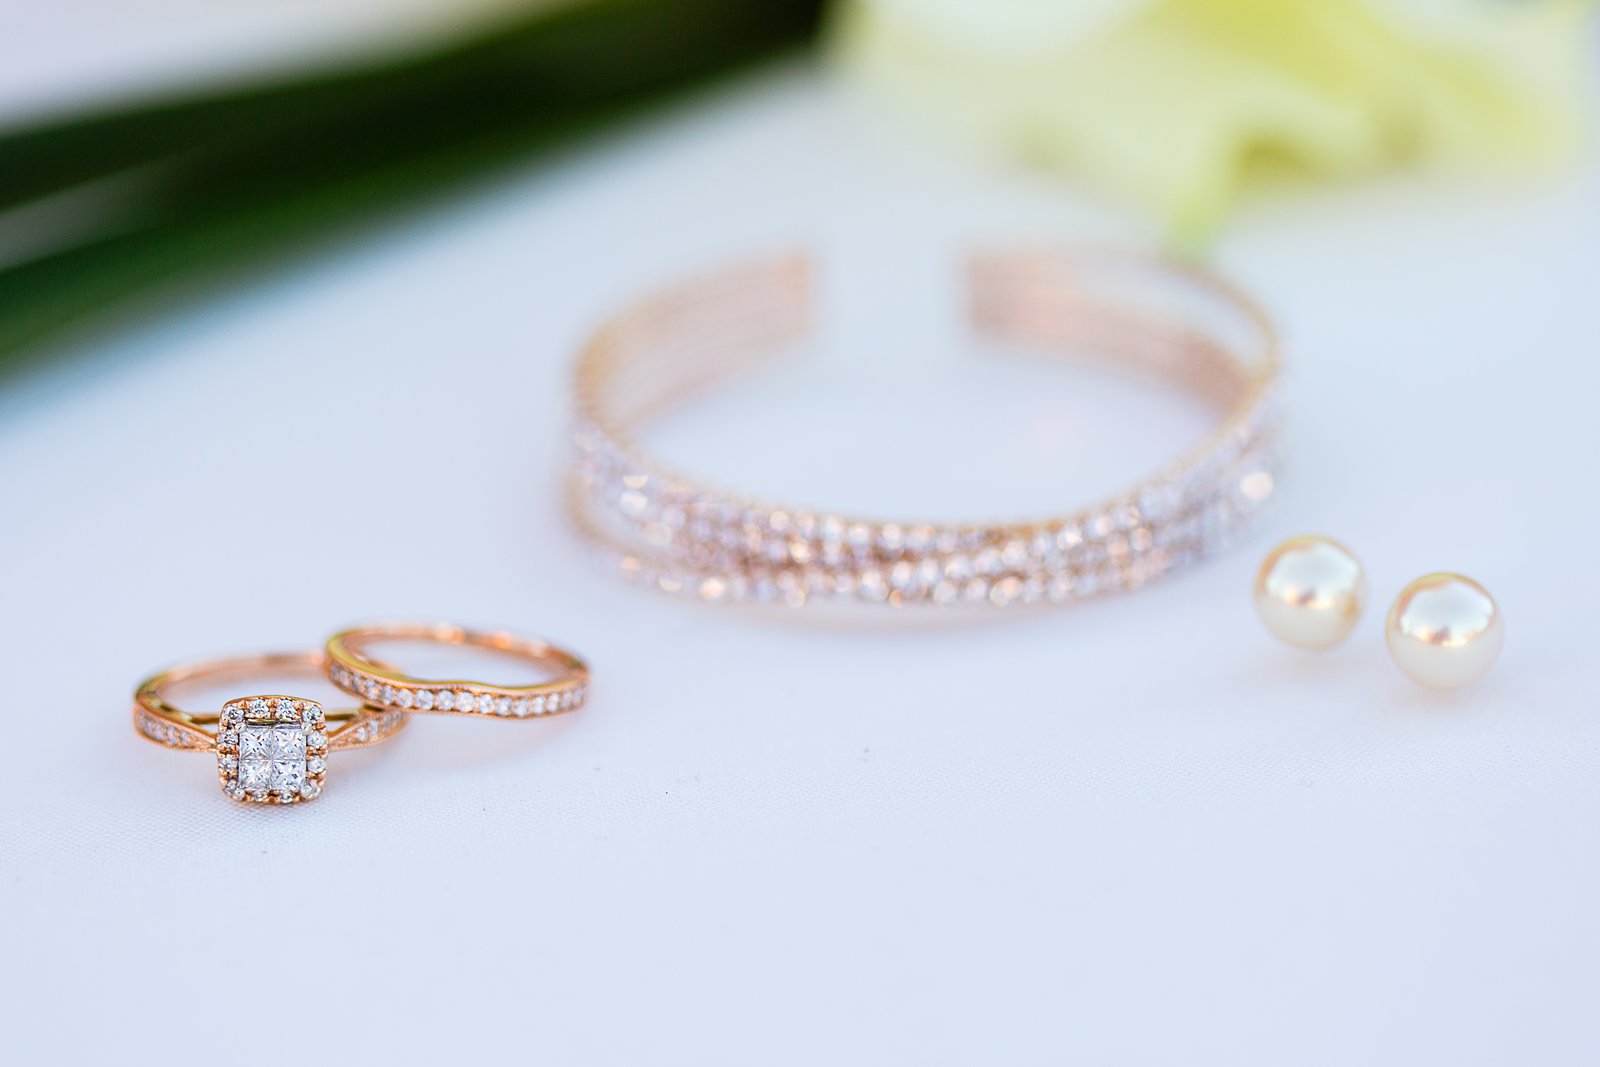 Brides's wedding day details of rose gold, diamond, and pearl bridal jewelry by PMA Photography.